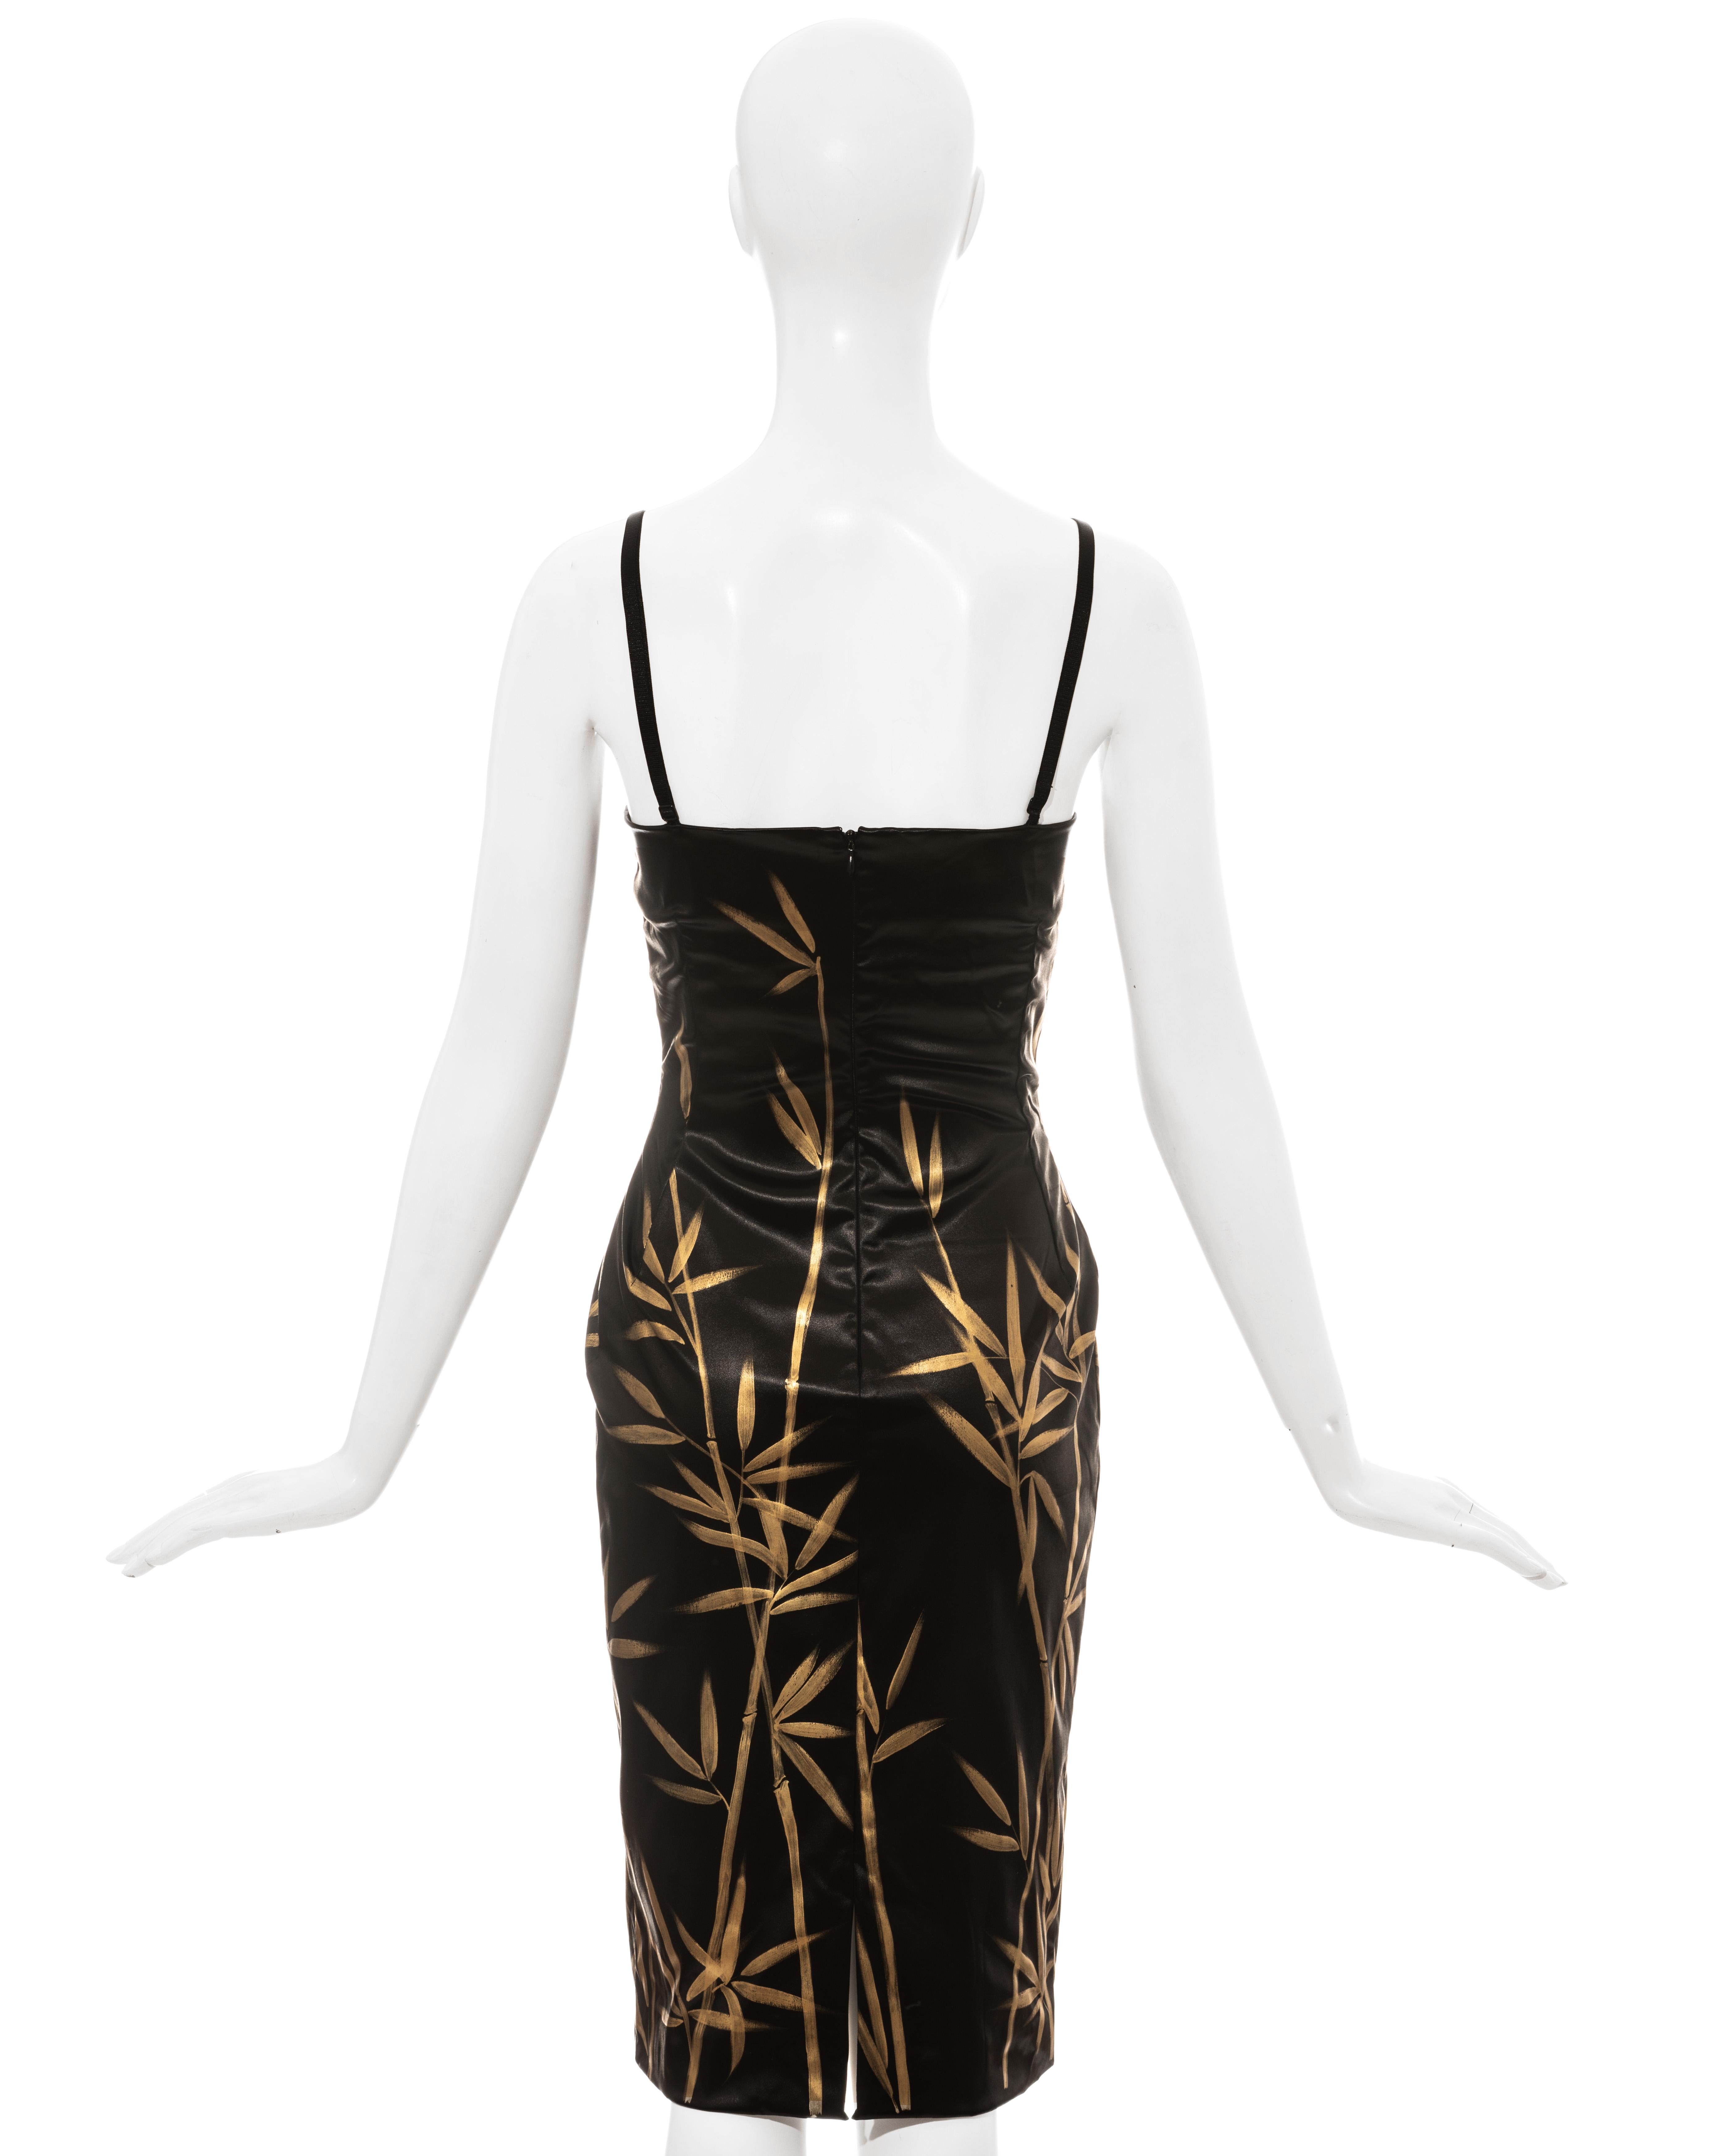 Dolce & Gabbana black and gold wet look evening dress, ss 1999 In Excellent Condition For Sale In London, GB